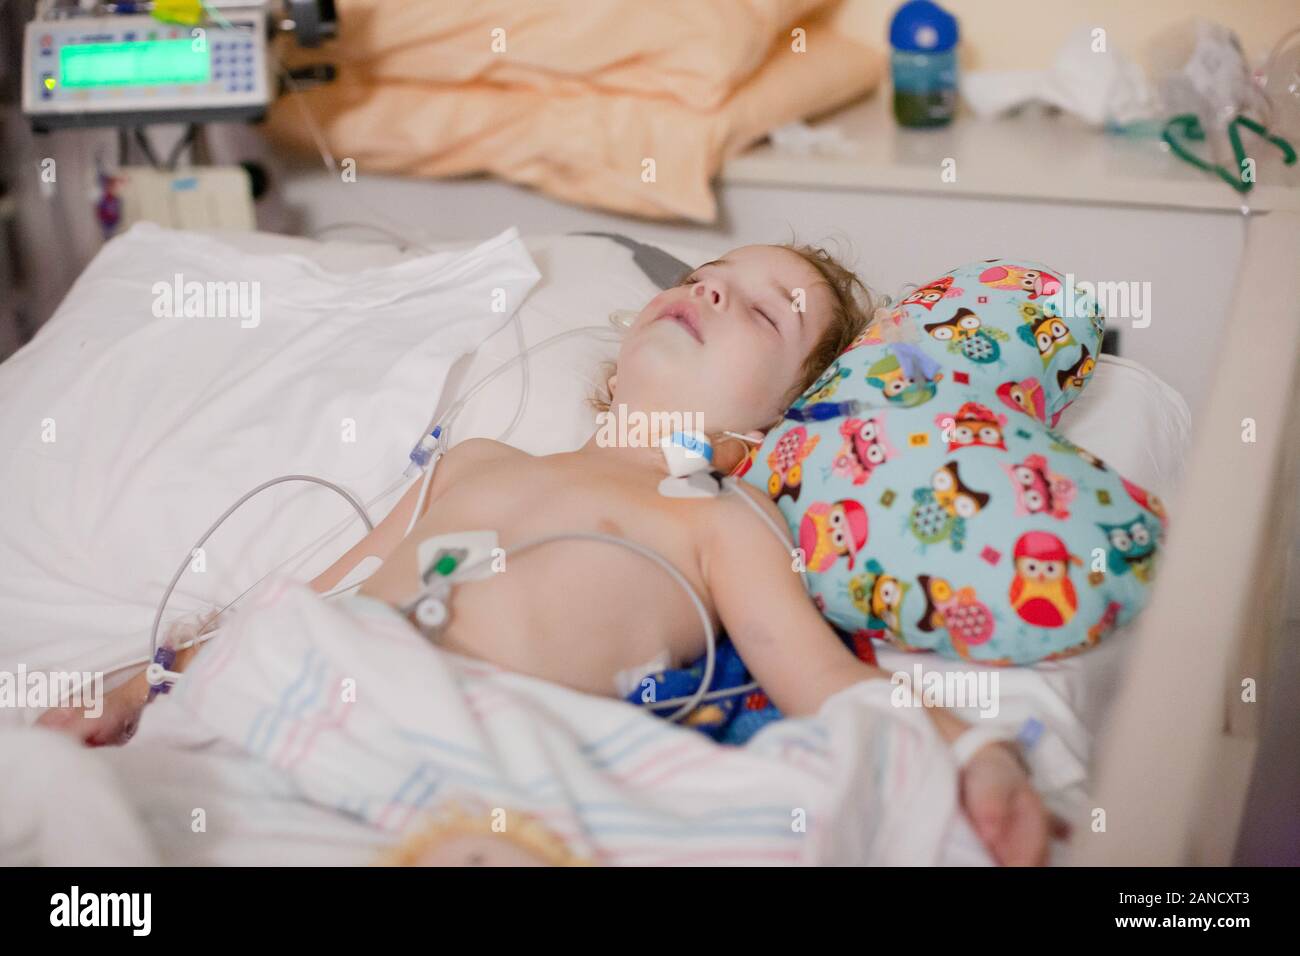 Toddler splay in hospital bed after surgery hooked to central line. Stock Photo